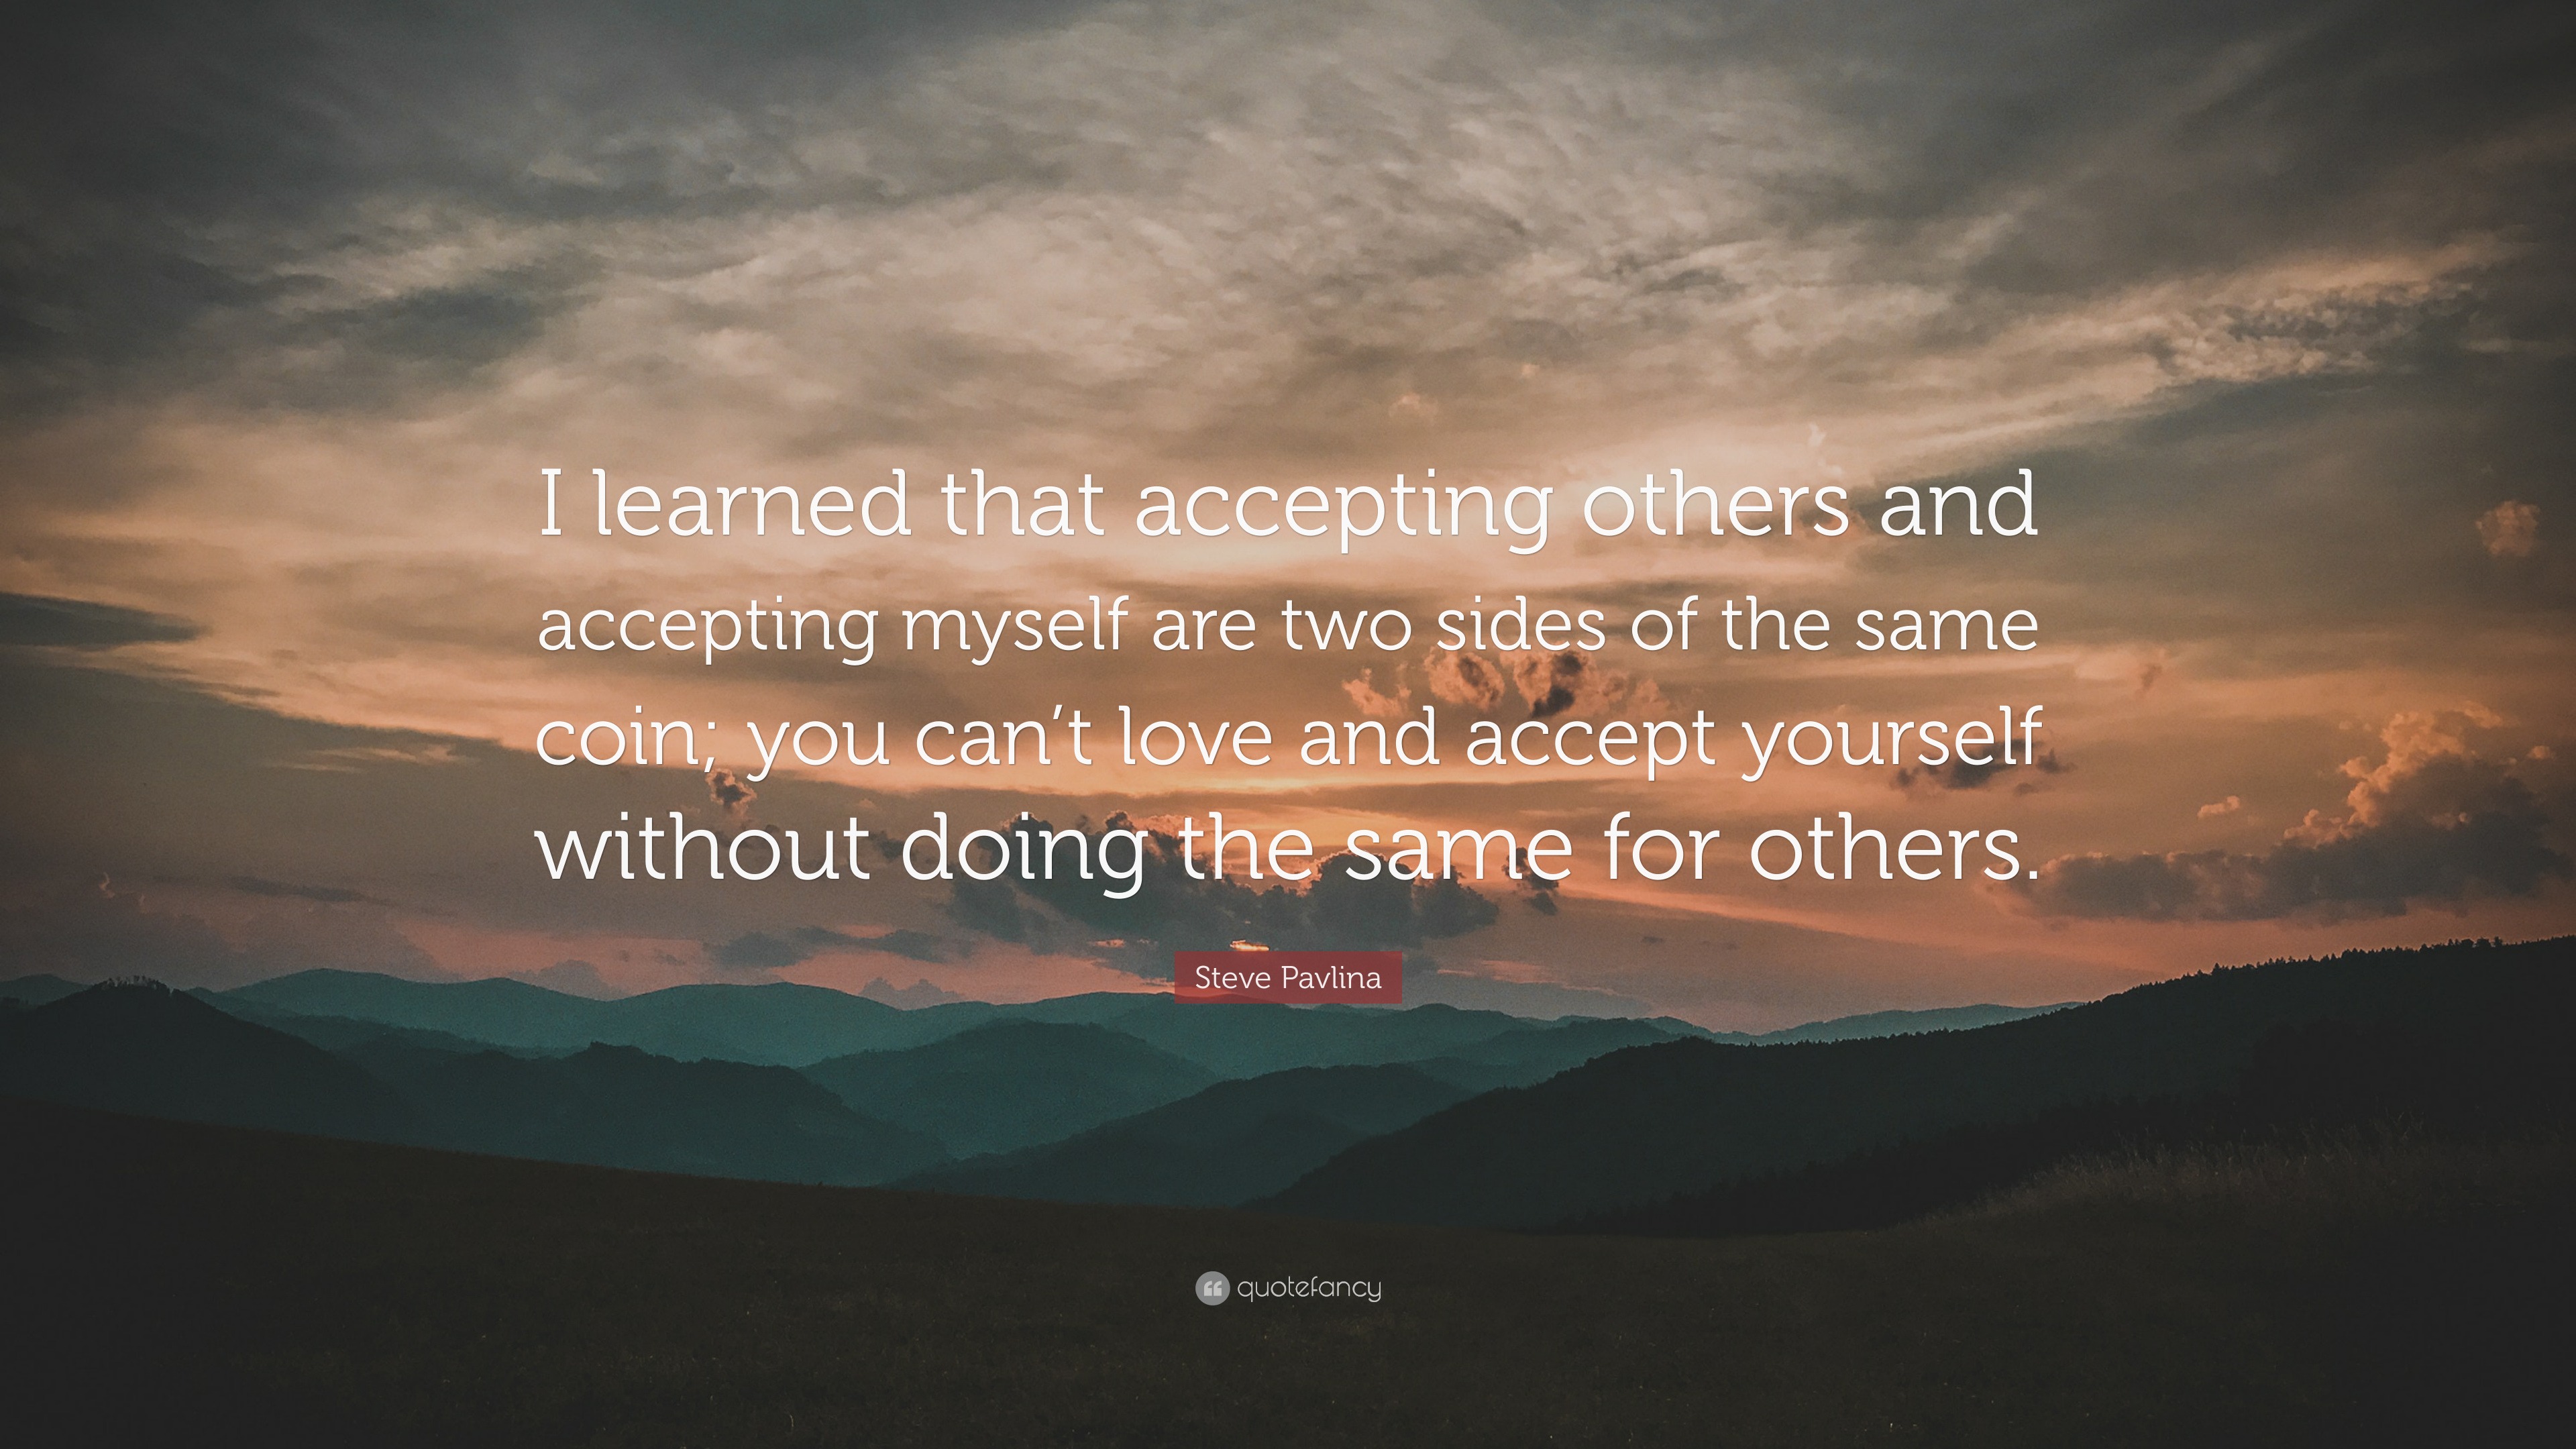 Steve Pavlina Quote: “I learned that accepting others and accepting ...